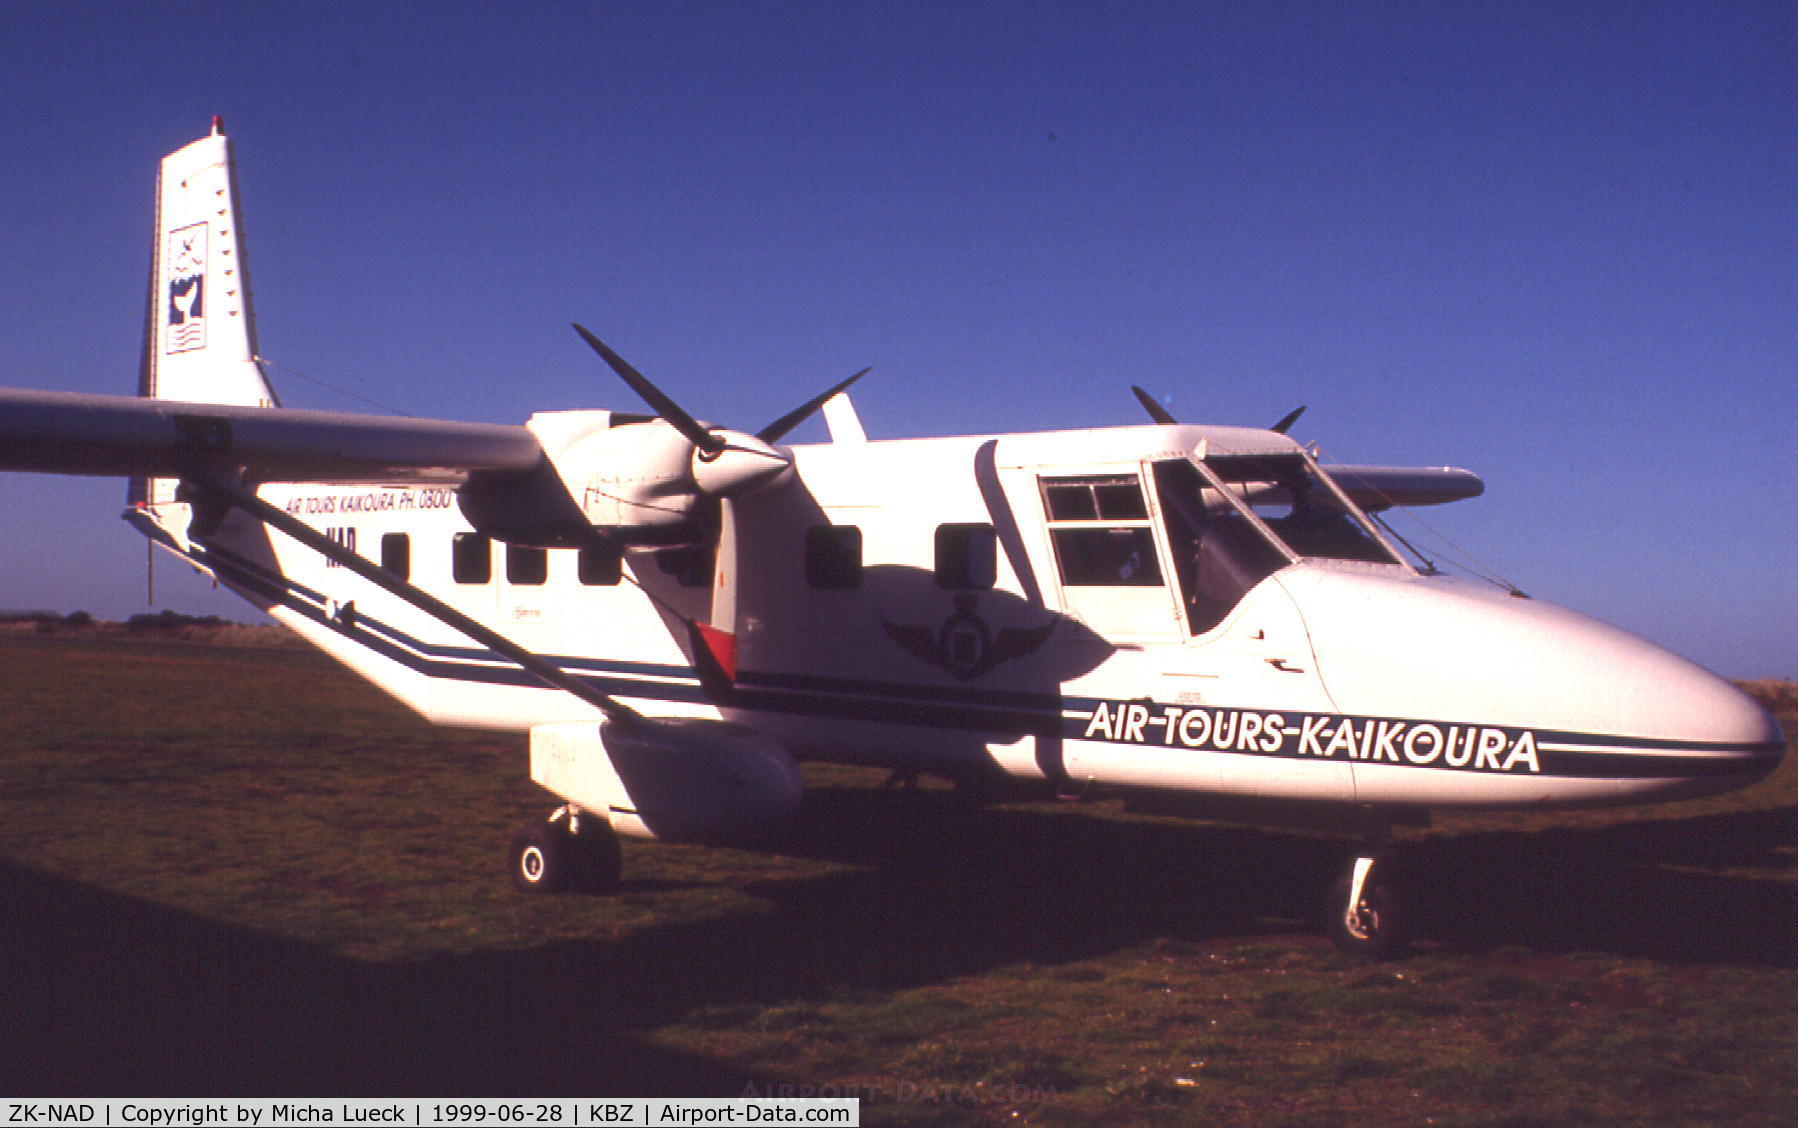 ZK-NAD, 1996 GAF N24A Nomad C/N N24A-30, Ex Flying Doctor Service aircraft, now used for local whale watching flights in Kaikoura